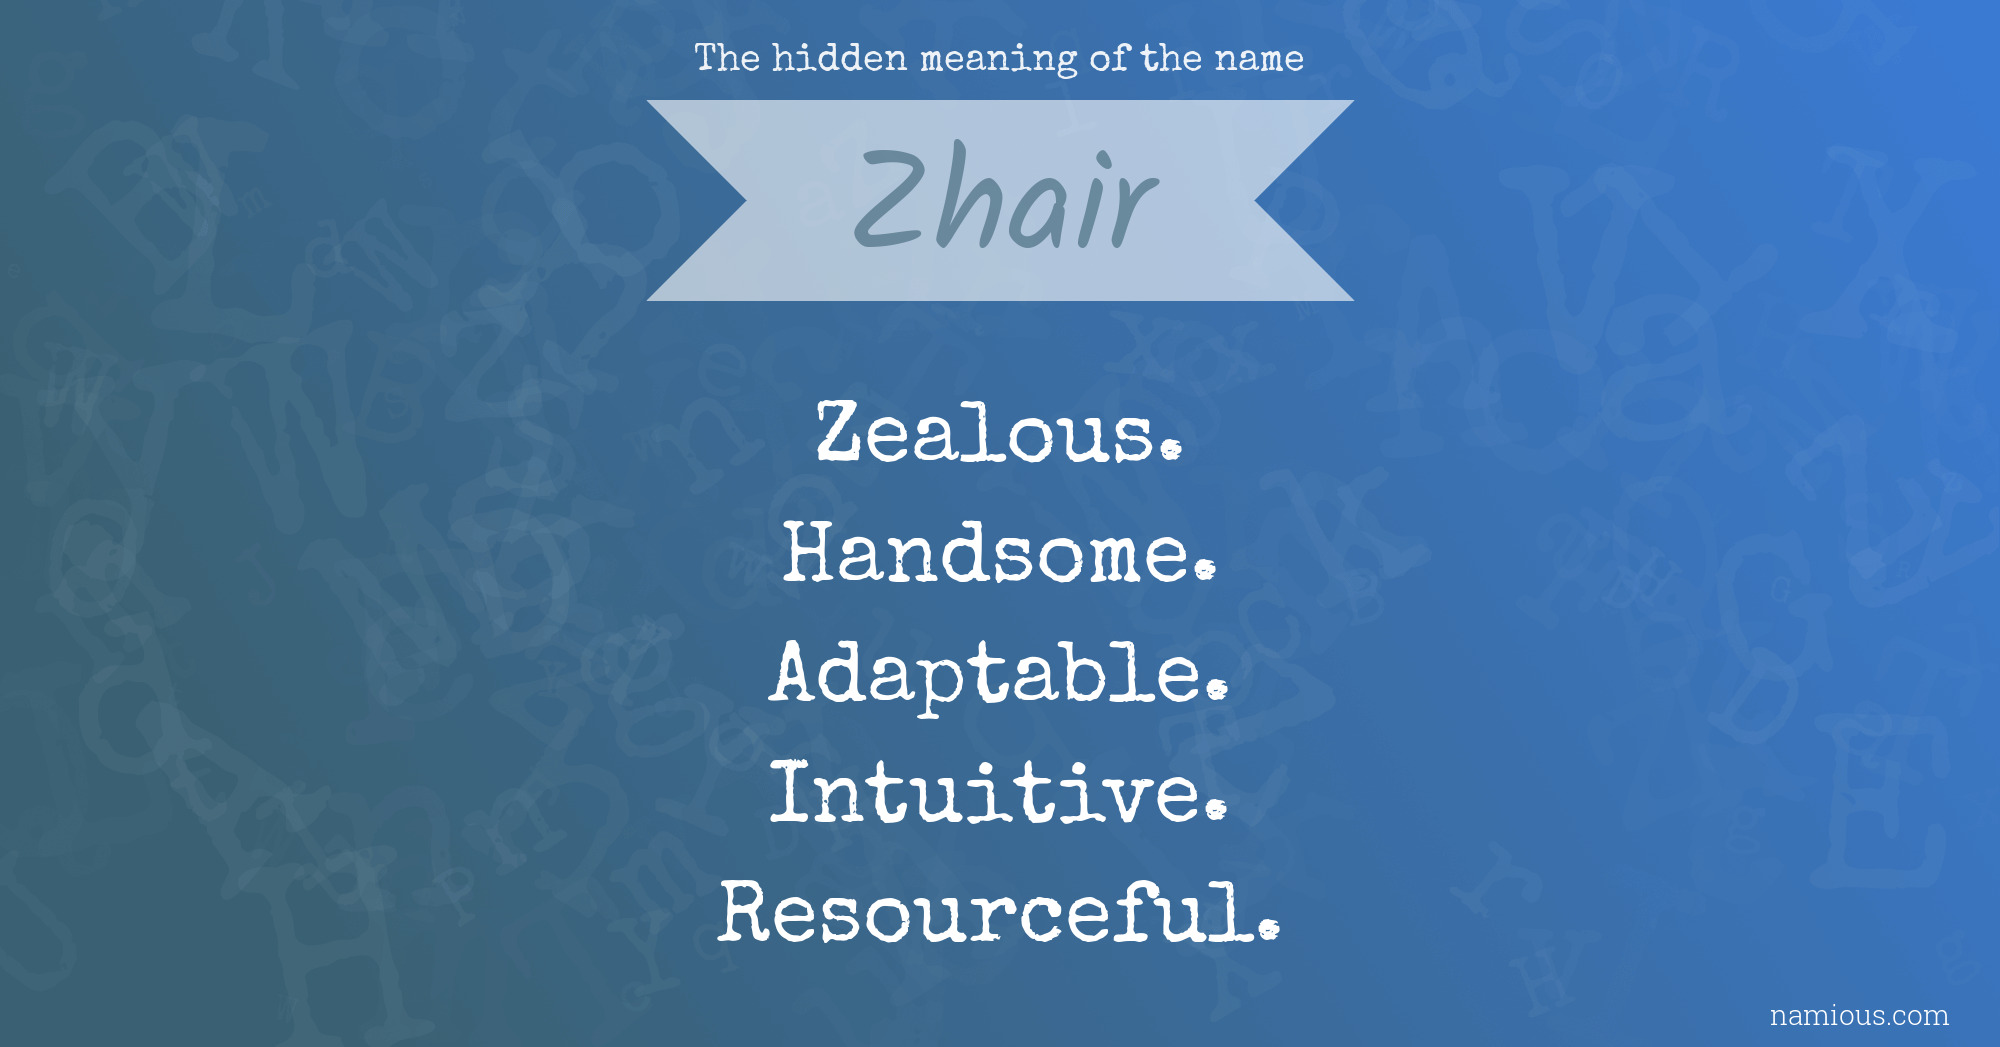 The hidden meaning of the name Zhair